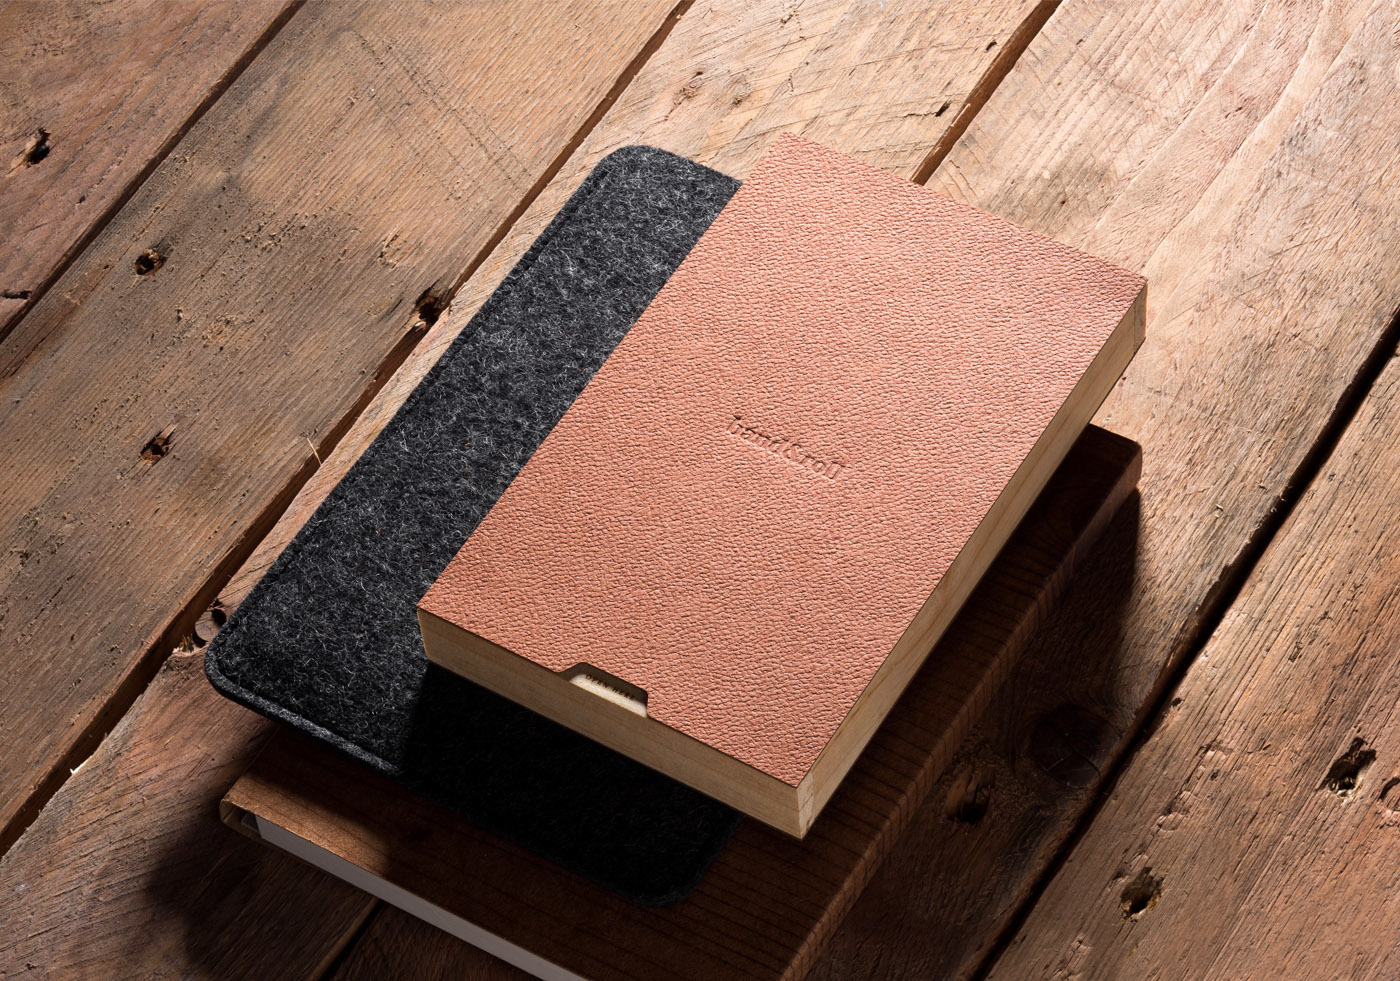 leather case natural wood brown emboss wool pencil box iPad iphone handmade germany package